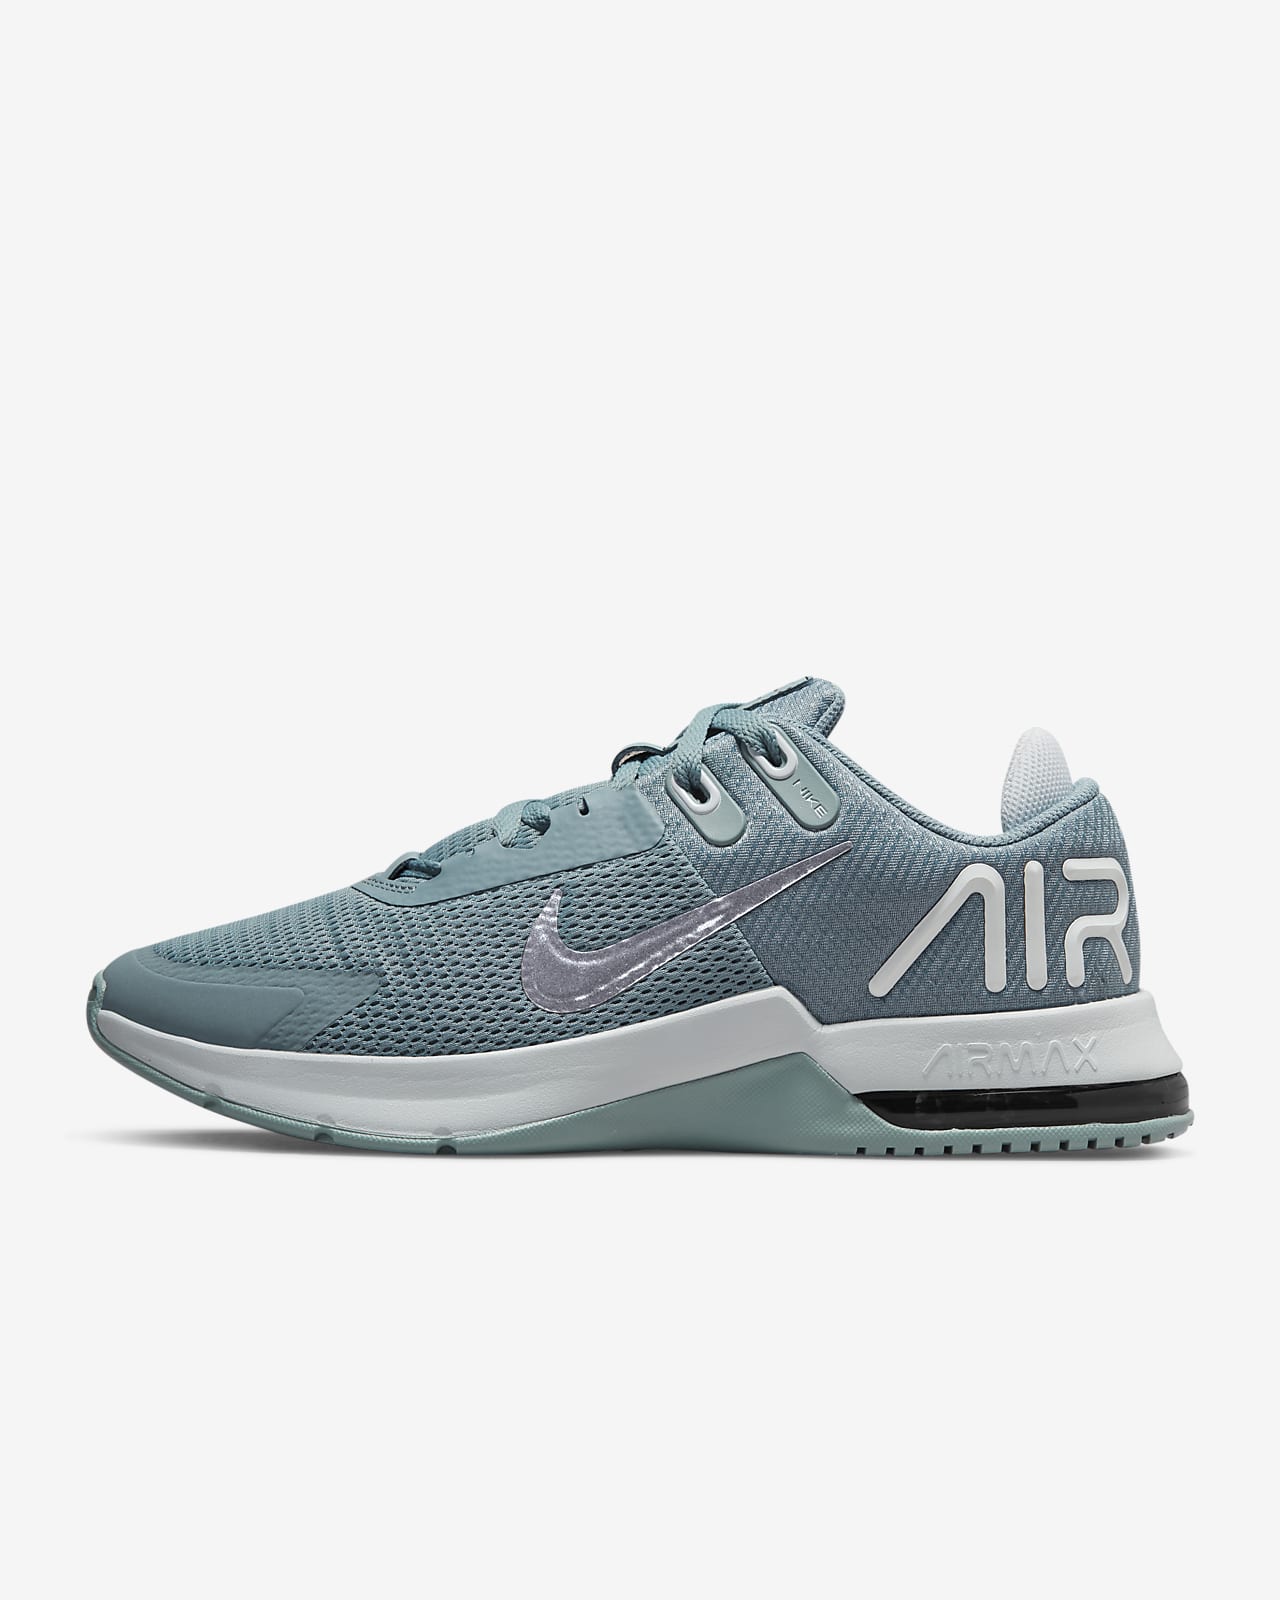 Air Alpha Trainer Men's Shoes. Nike ID